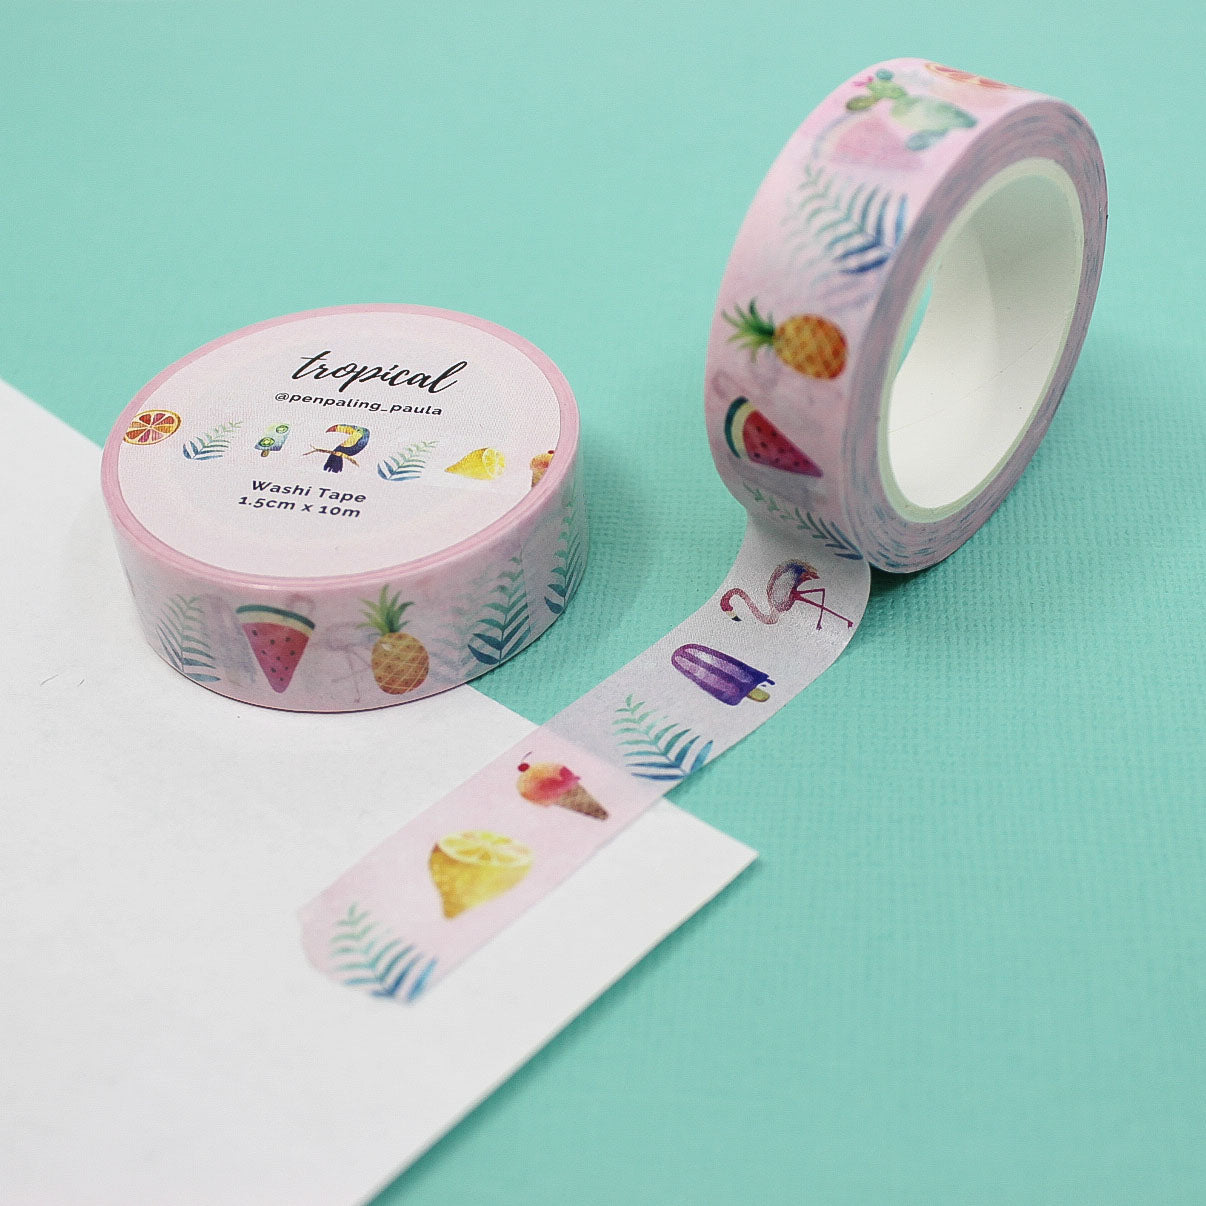 Brighten your projects with this vibrant washi tape featuring tropical summer motifs such as palm trees, hibiscus flowers, and beach icons, perfect for adding a sunny, island vibe to your scrapbooks and planners. This tape is from Penpaling Paula and sold at BBB Supplies Craft Shop